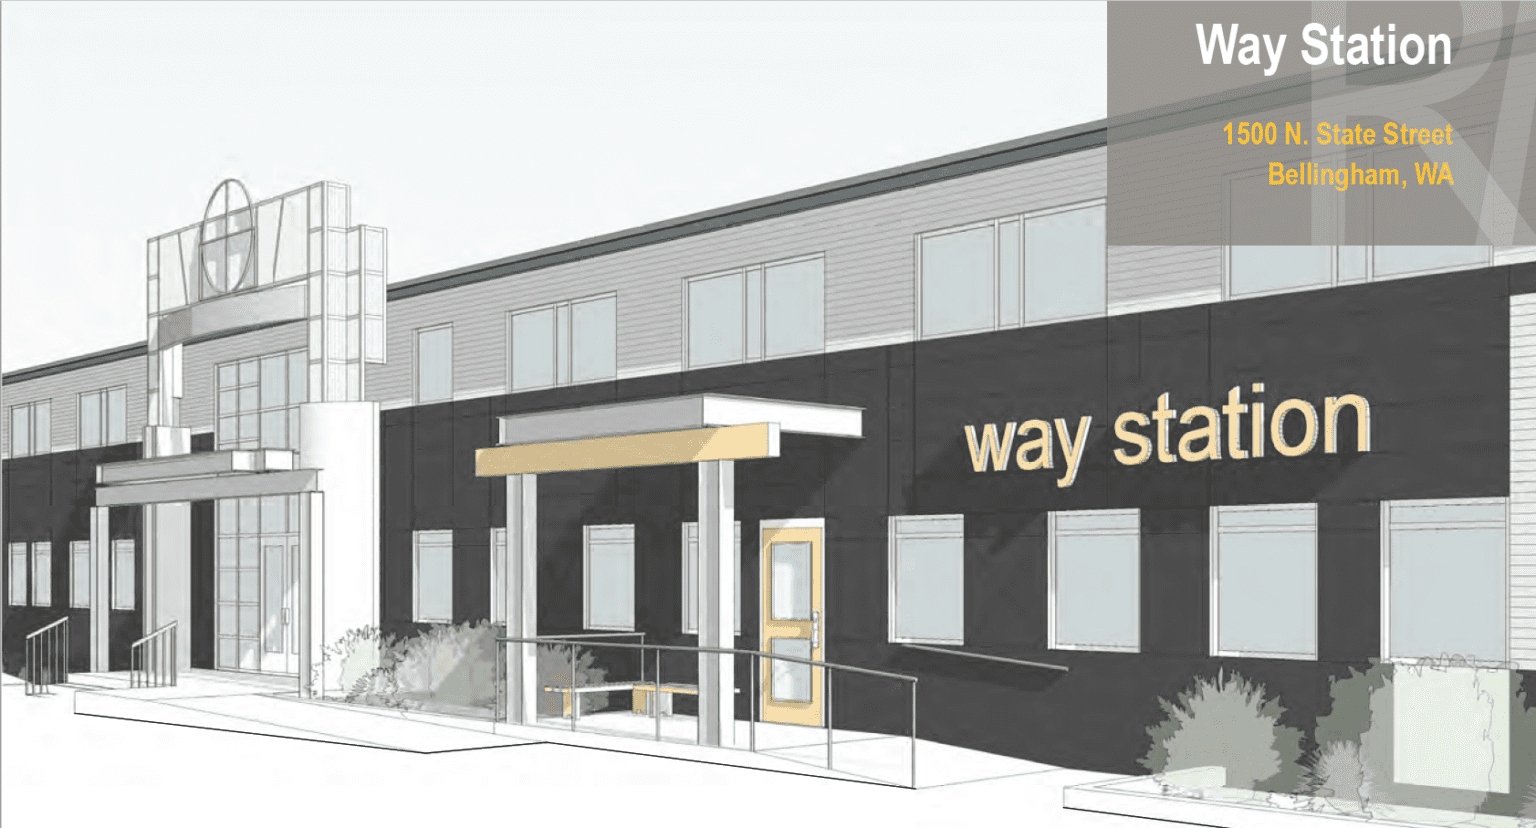 The Way Station is expected to open in early 2024 at the former location of Whatcom County Health and Community Services offices at 1500 N. State St. in Bellingham. Unity Care Northwest received a $1.5 million grant to pay for three years of services at The Way Station.